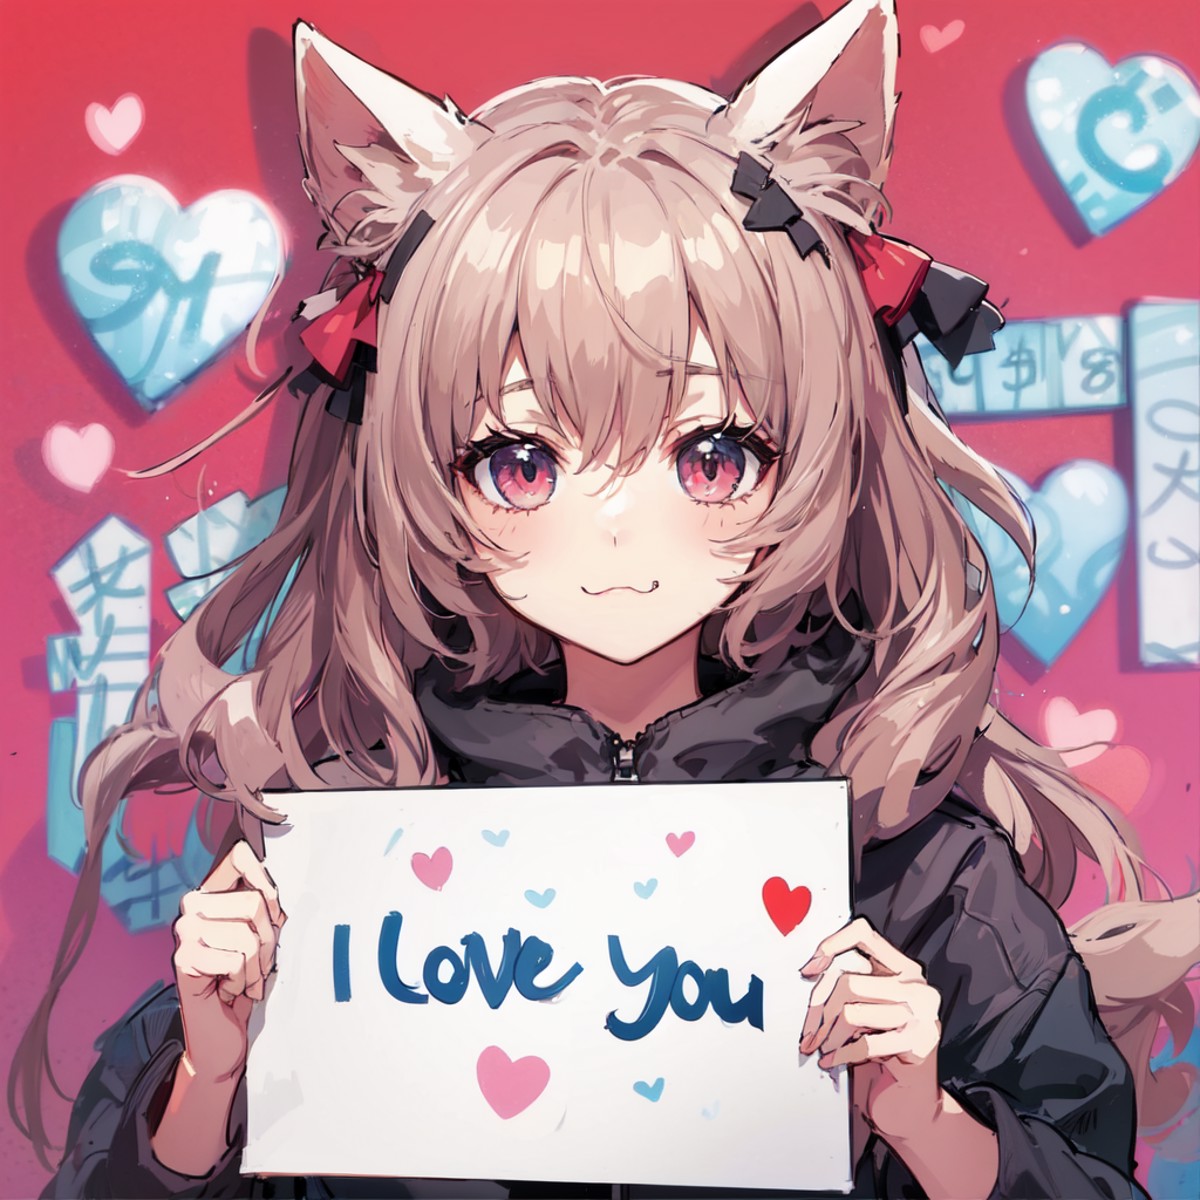 anime artwork a catgirl holding a sign that says "I love you", naughty face. anime style, key visual, vibrant, studio anim...